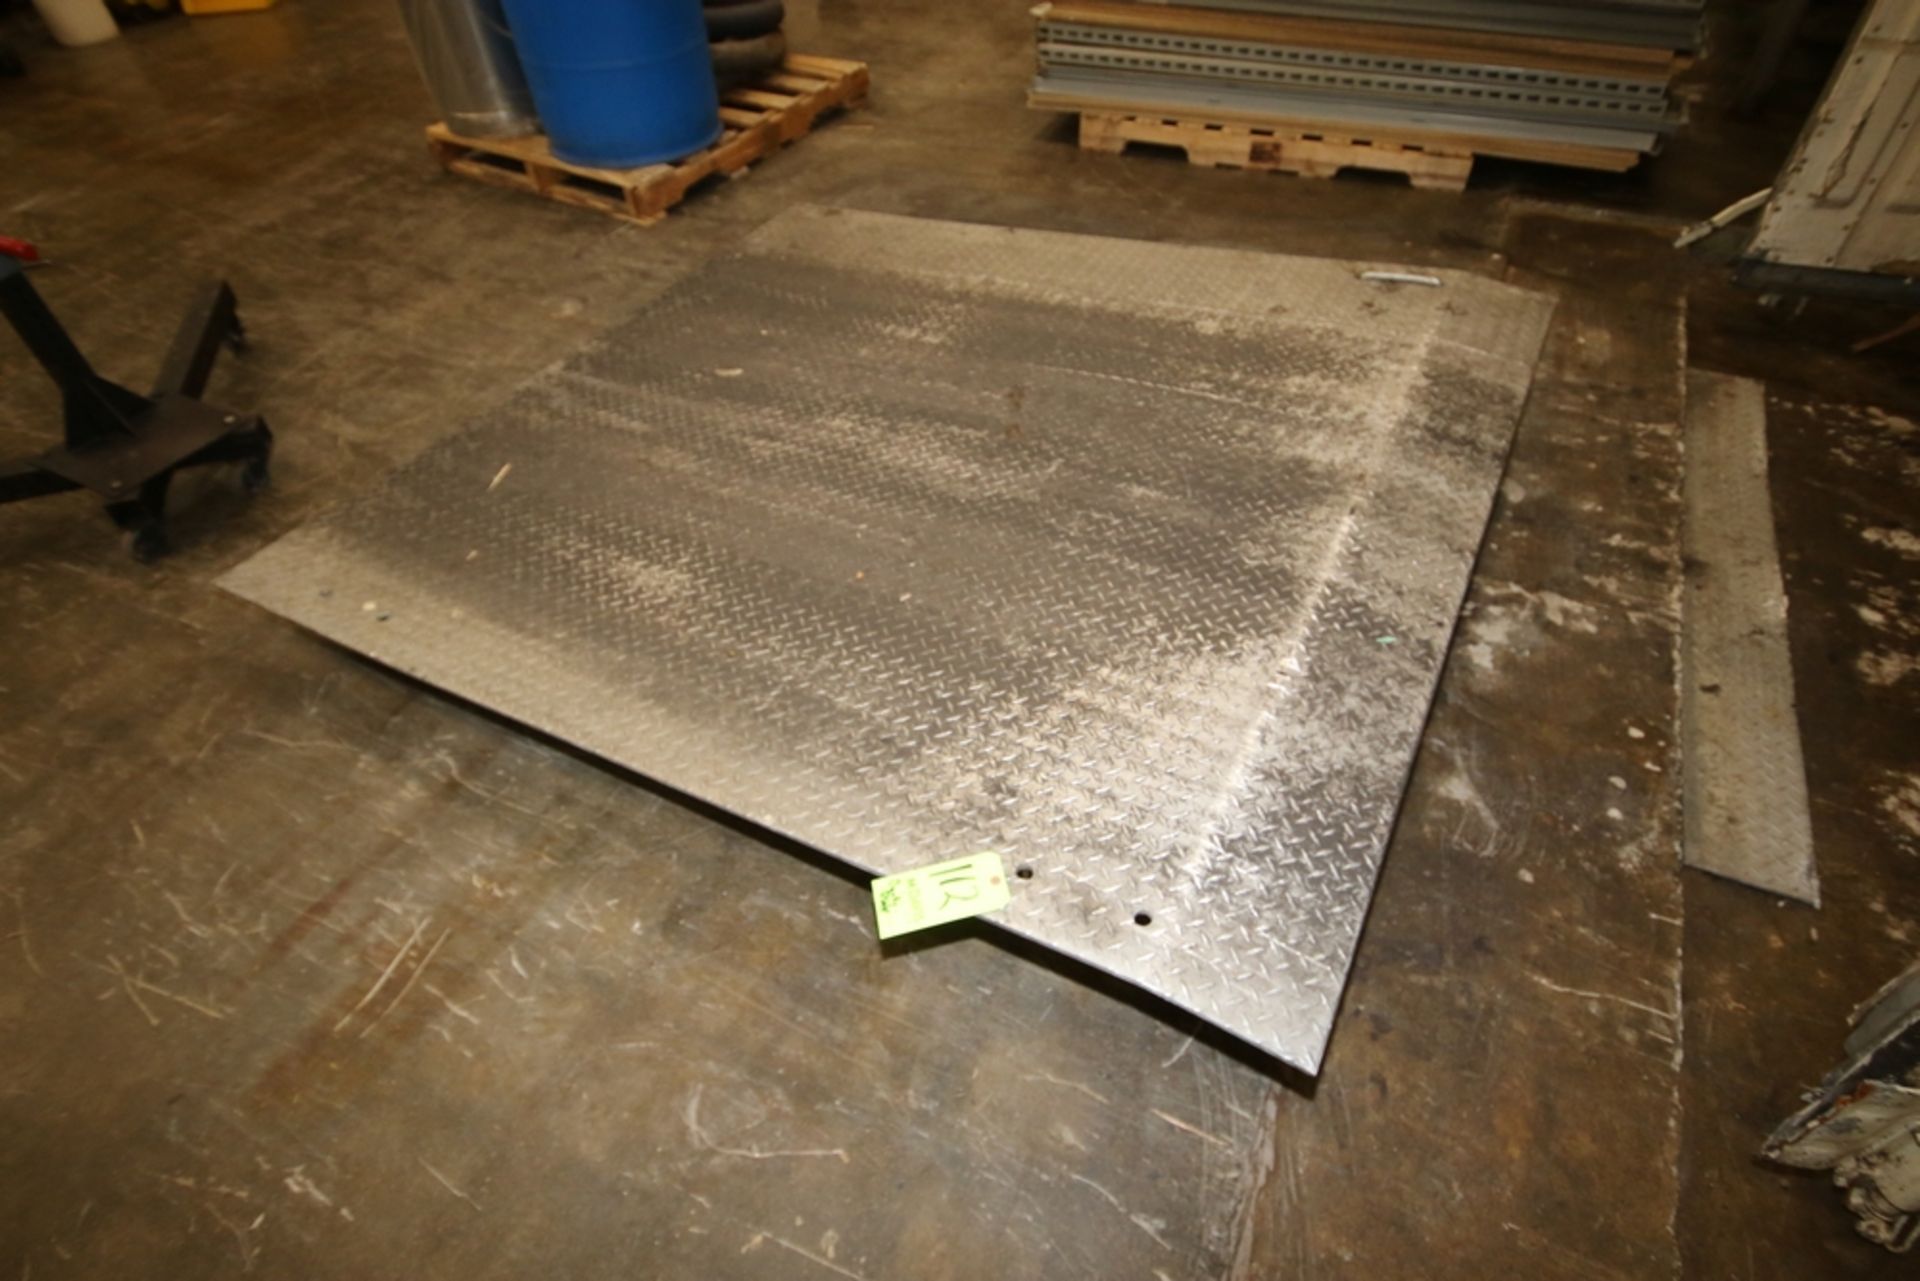 Galvanized Dock Plate, Overall Dims.: Aprox. 75" L x 72" W - Image 2 of 2